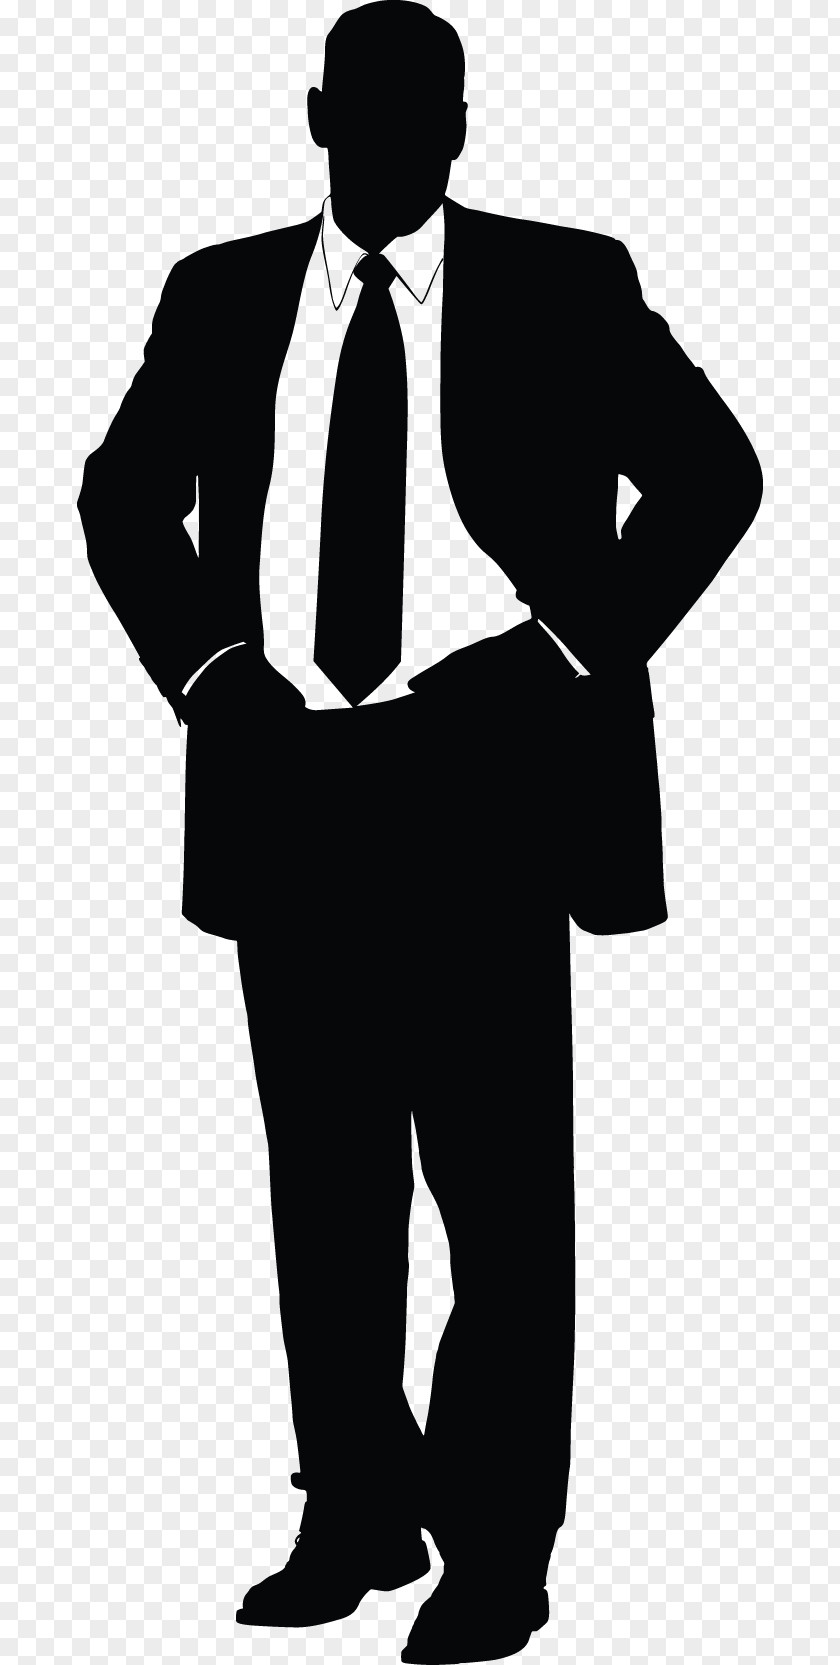 Man Silhouette Businessperson Company Management Small Business PNG